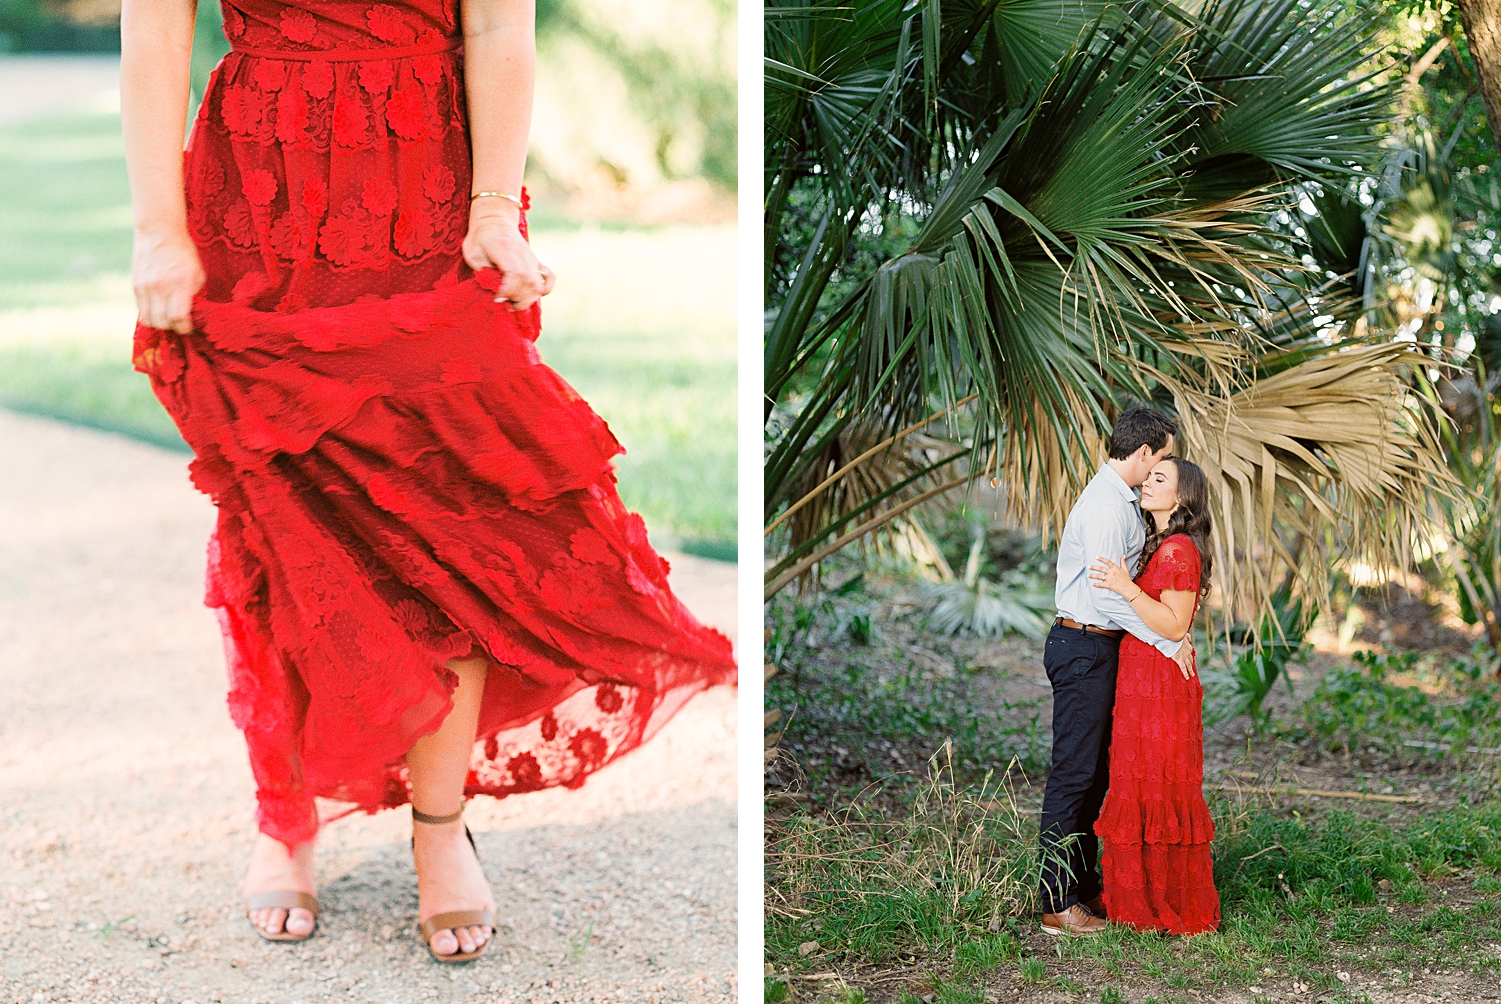 Man and woman in red dress embracing in green garden Austin engagement at Laguna Gloria